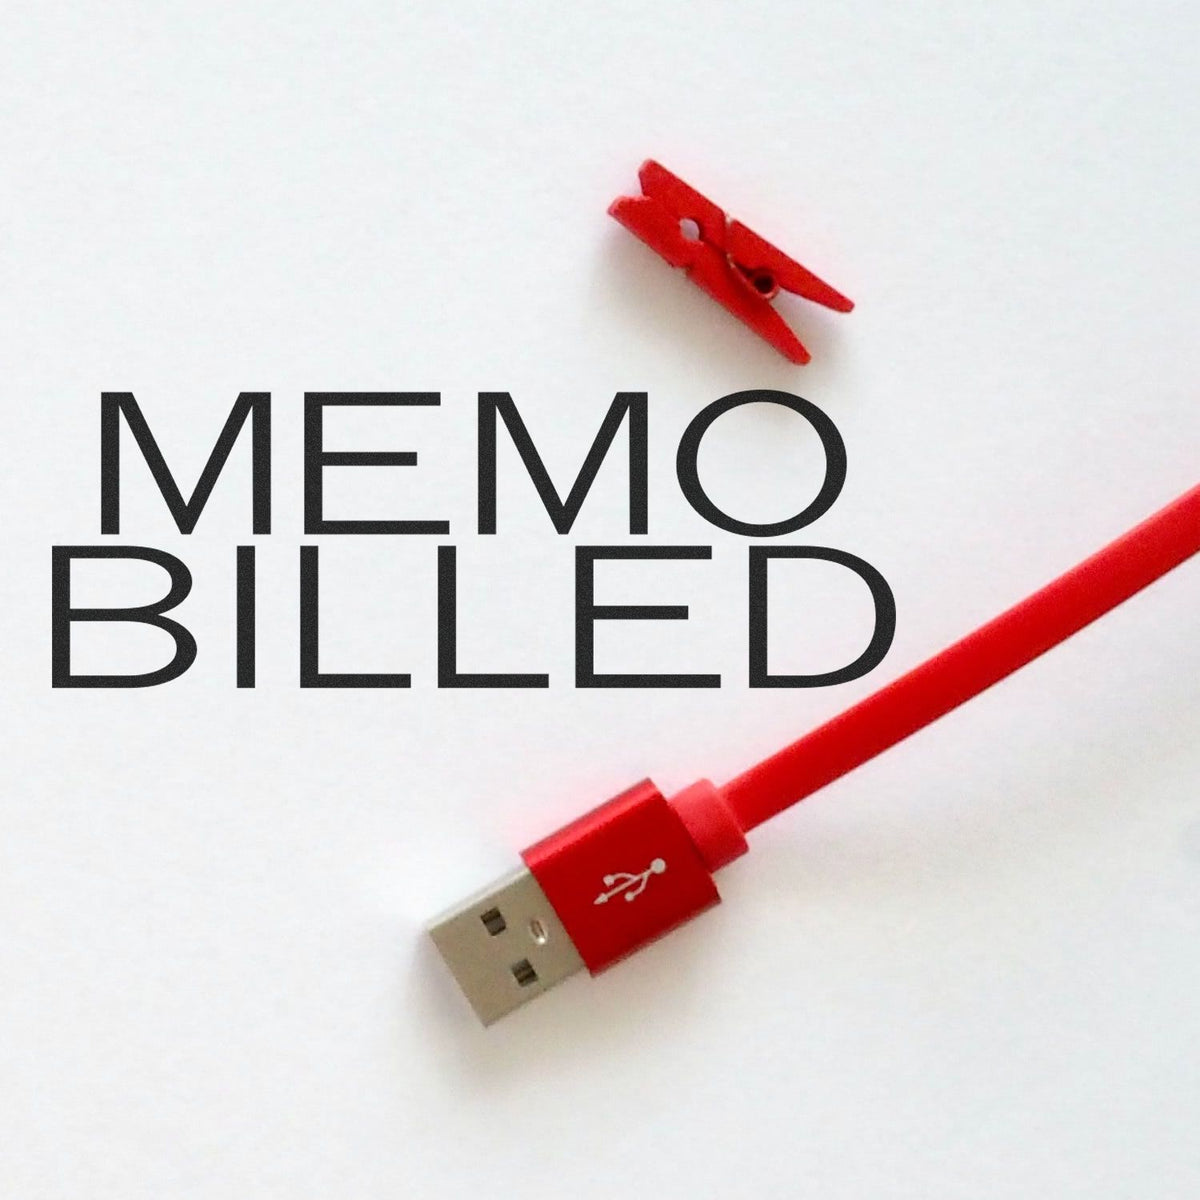 Memo Billed Rubber Stamp Lifestyle Photo